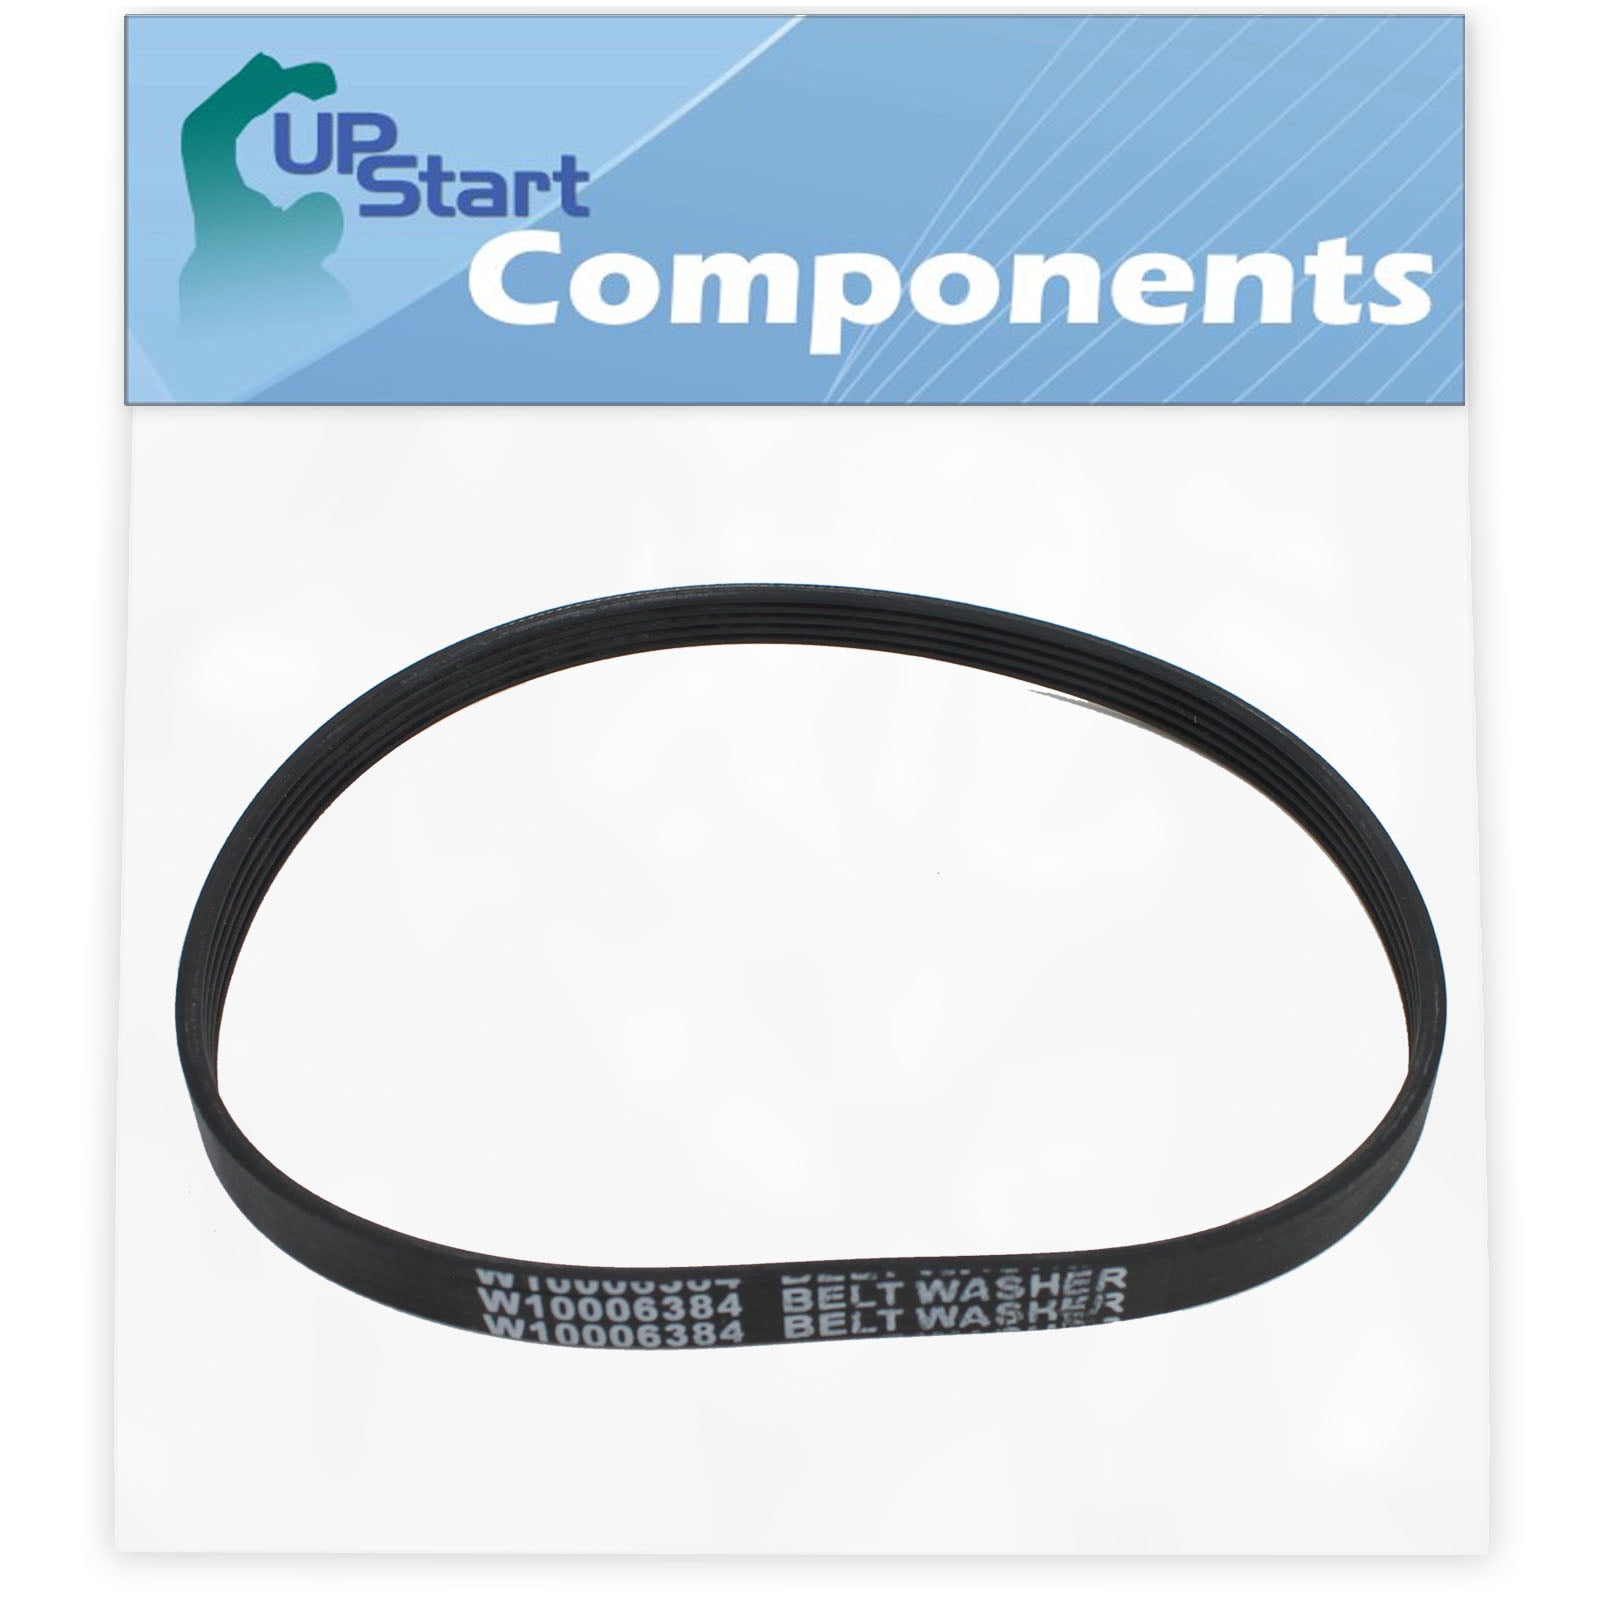 W10006384 Washer Belt Replacement for Kenmore / Sears 110.25102310 -  Compatible with WPW10006384 Washing Machine Drive Belt - Walmart.com